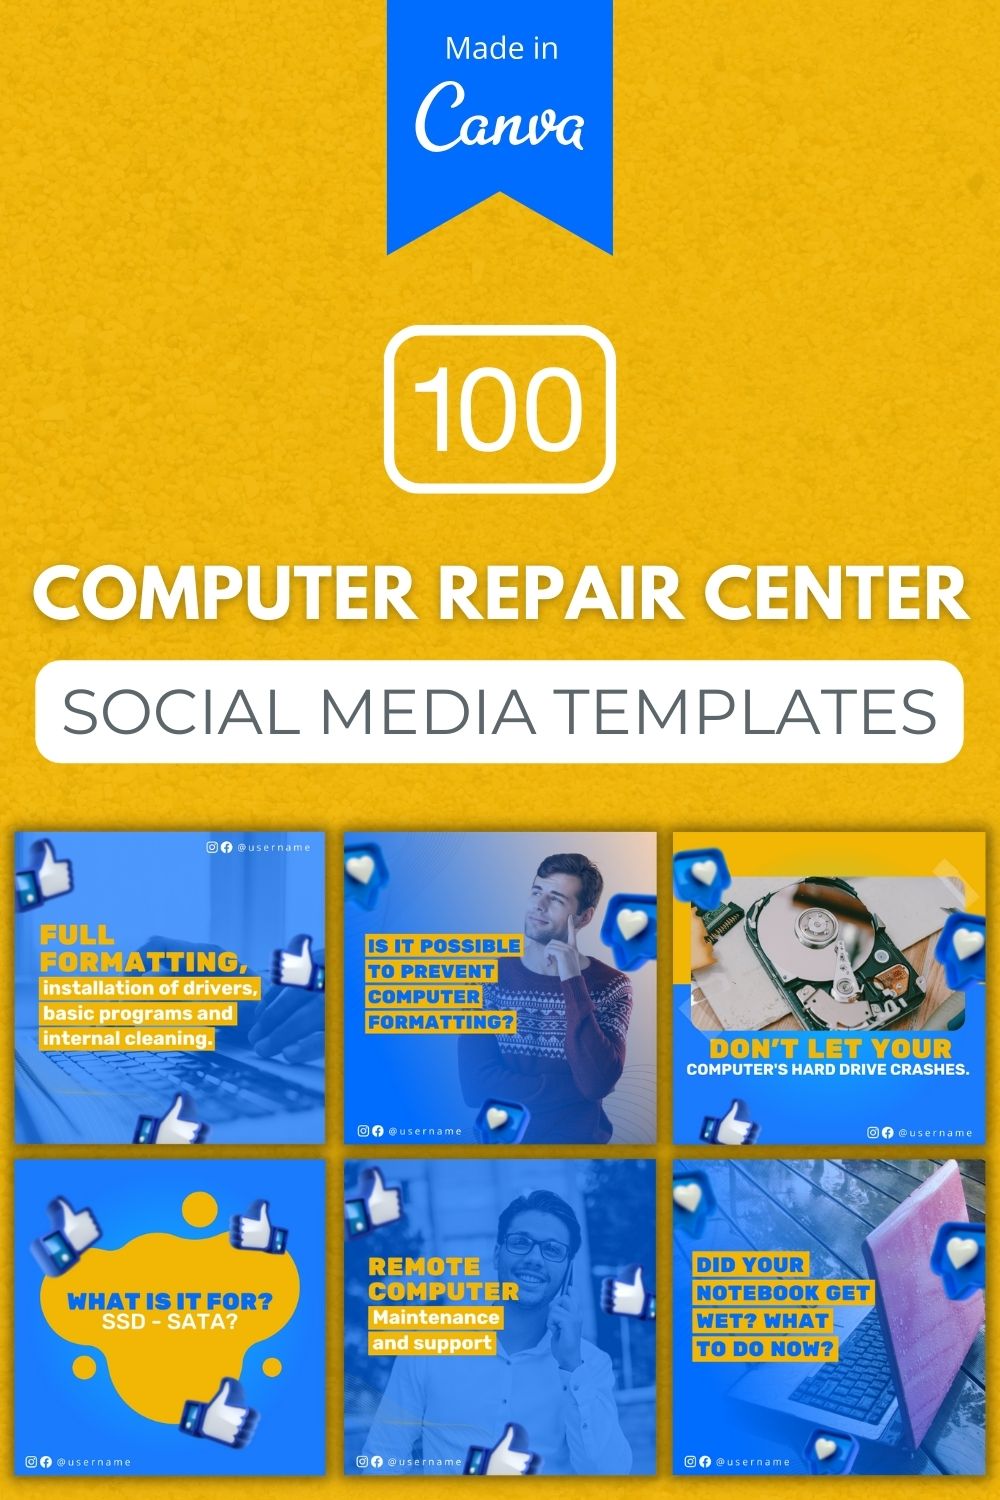 100 Computer Repair Center Canva Templates For Social Media pinterest preview image.